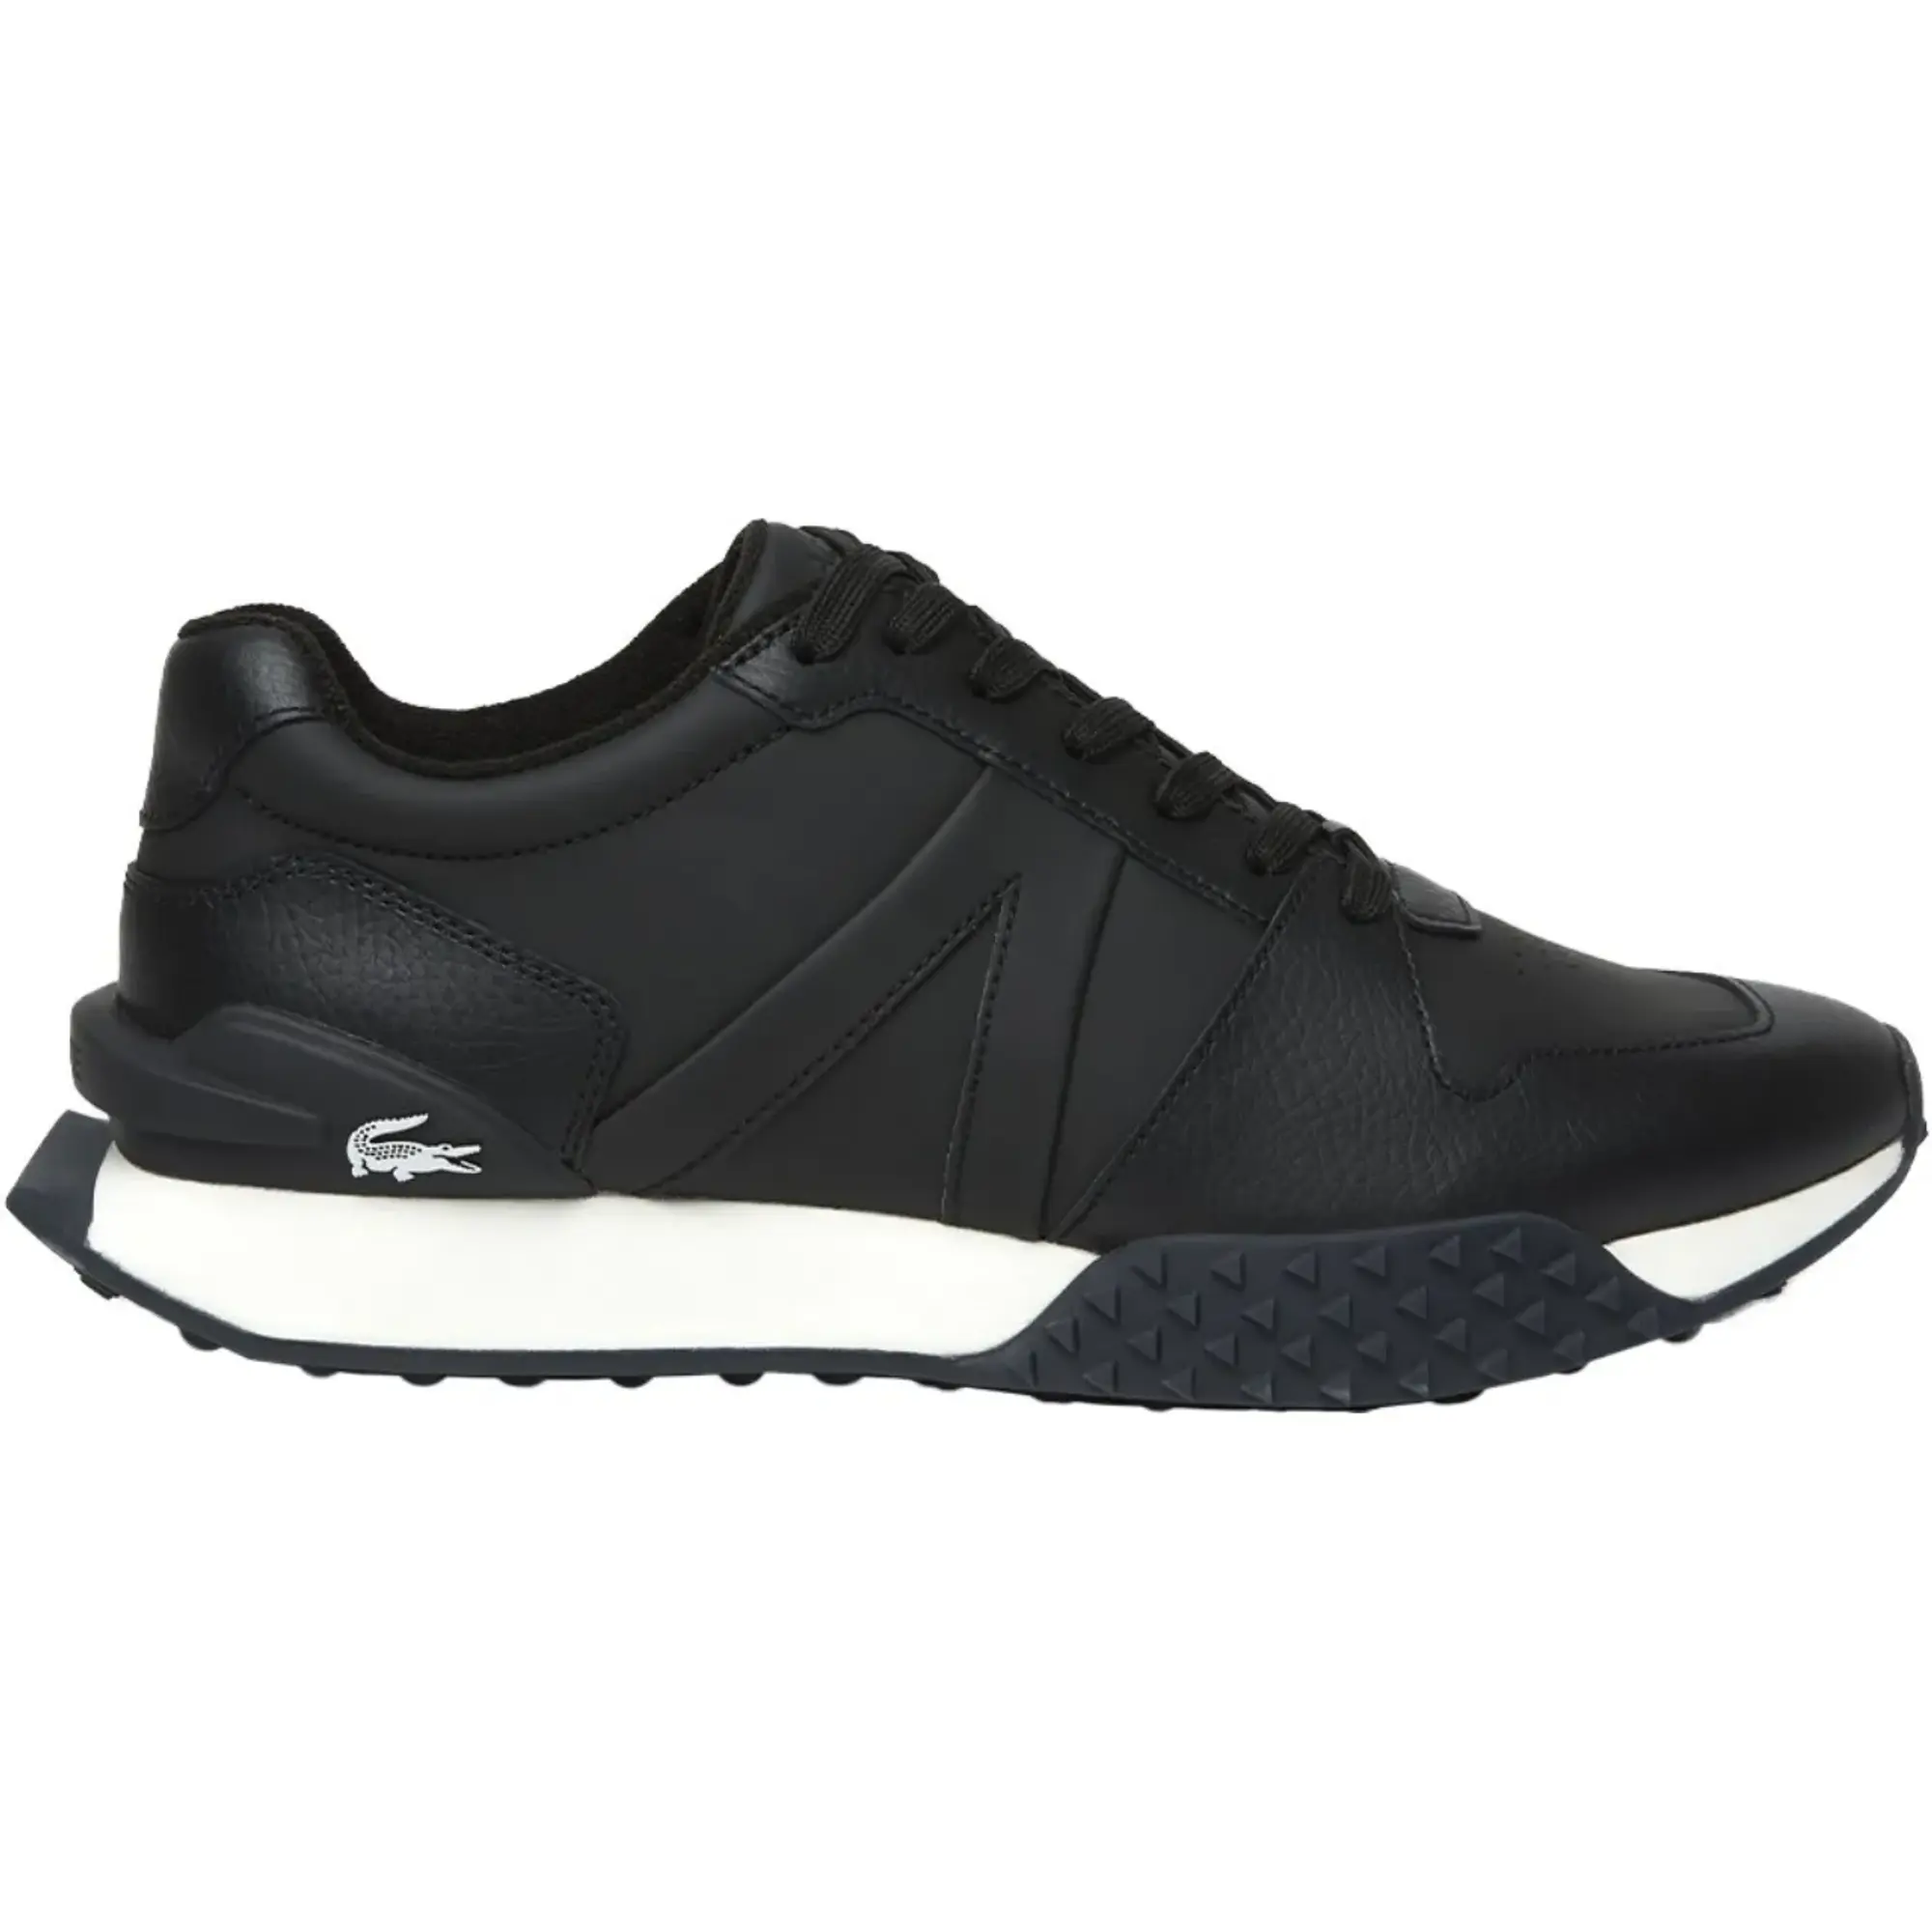 Lacoste L-spin Deluxe 2.0 2222sma Trainers  - Black